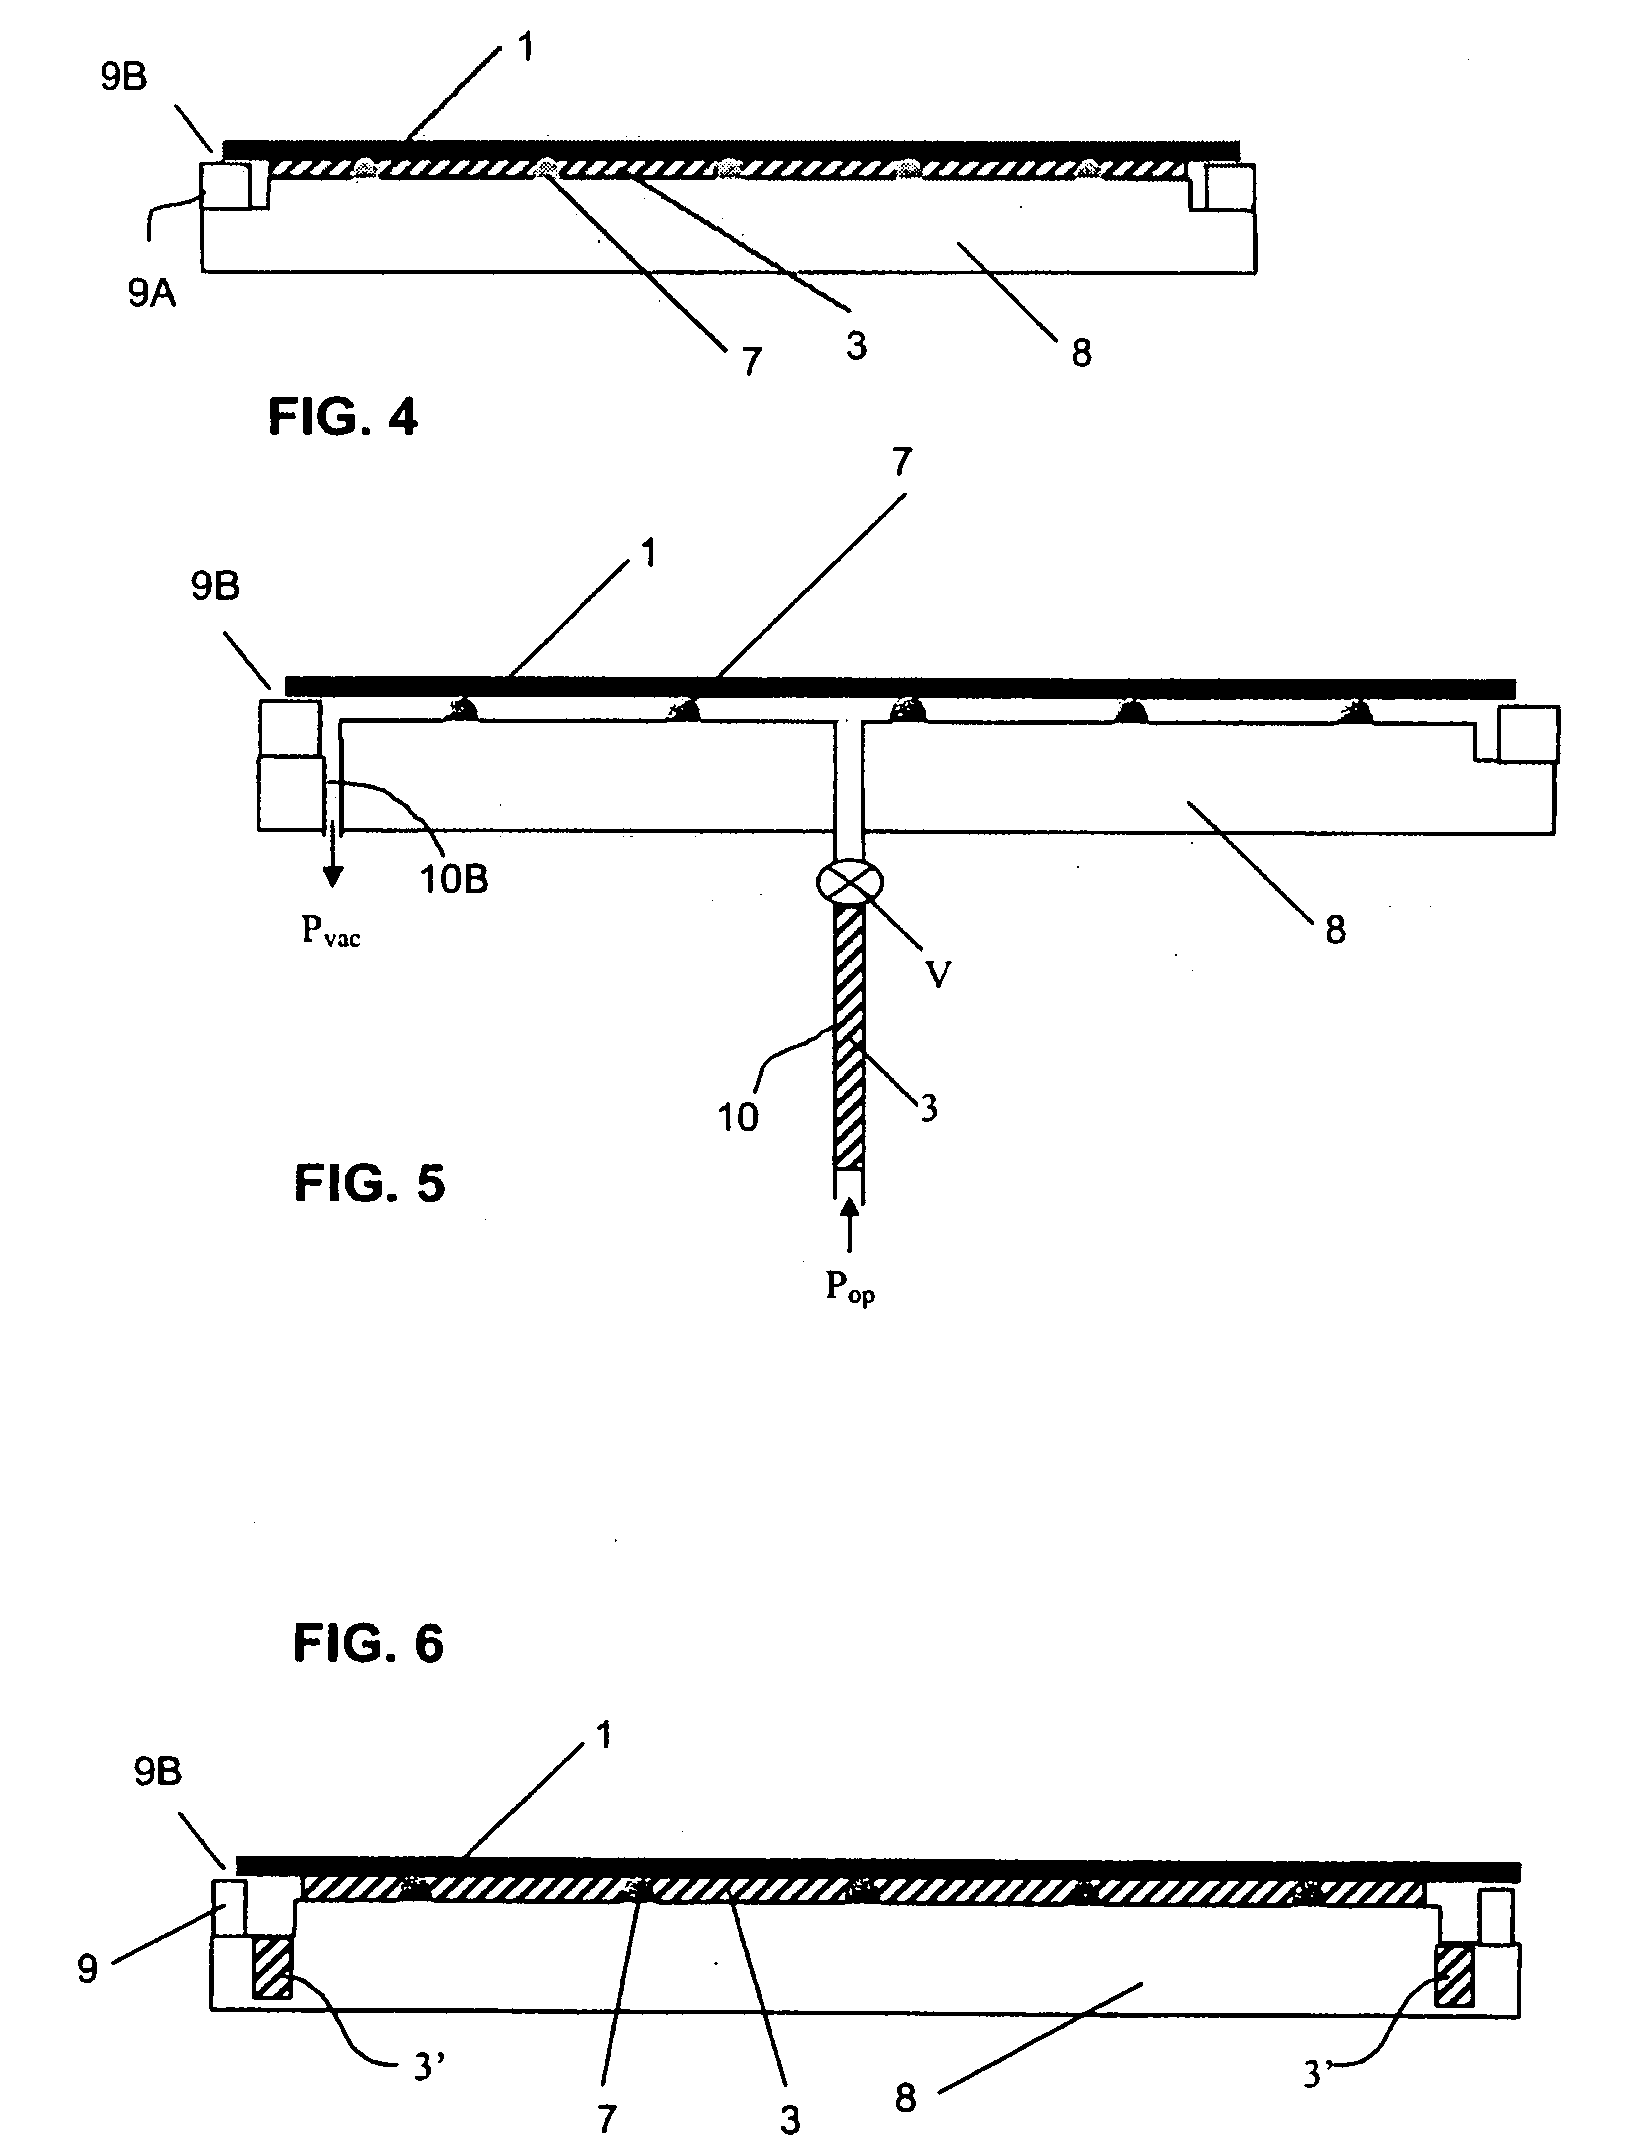 Lithography system, method of clamping and wafer table